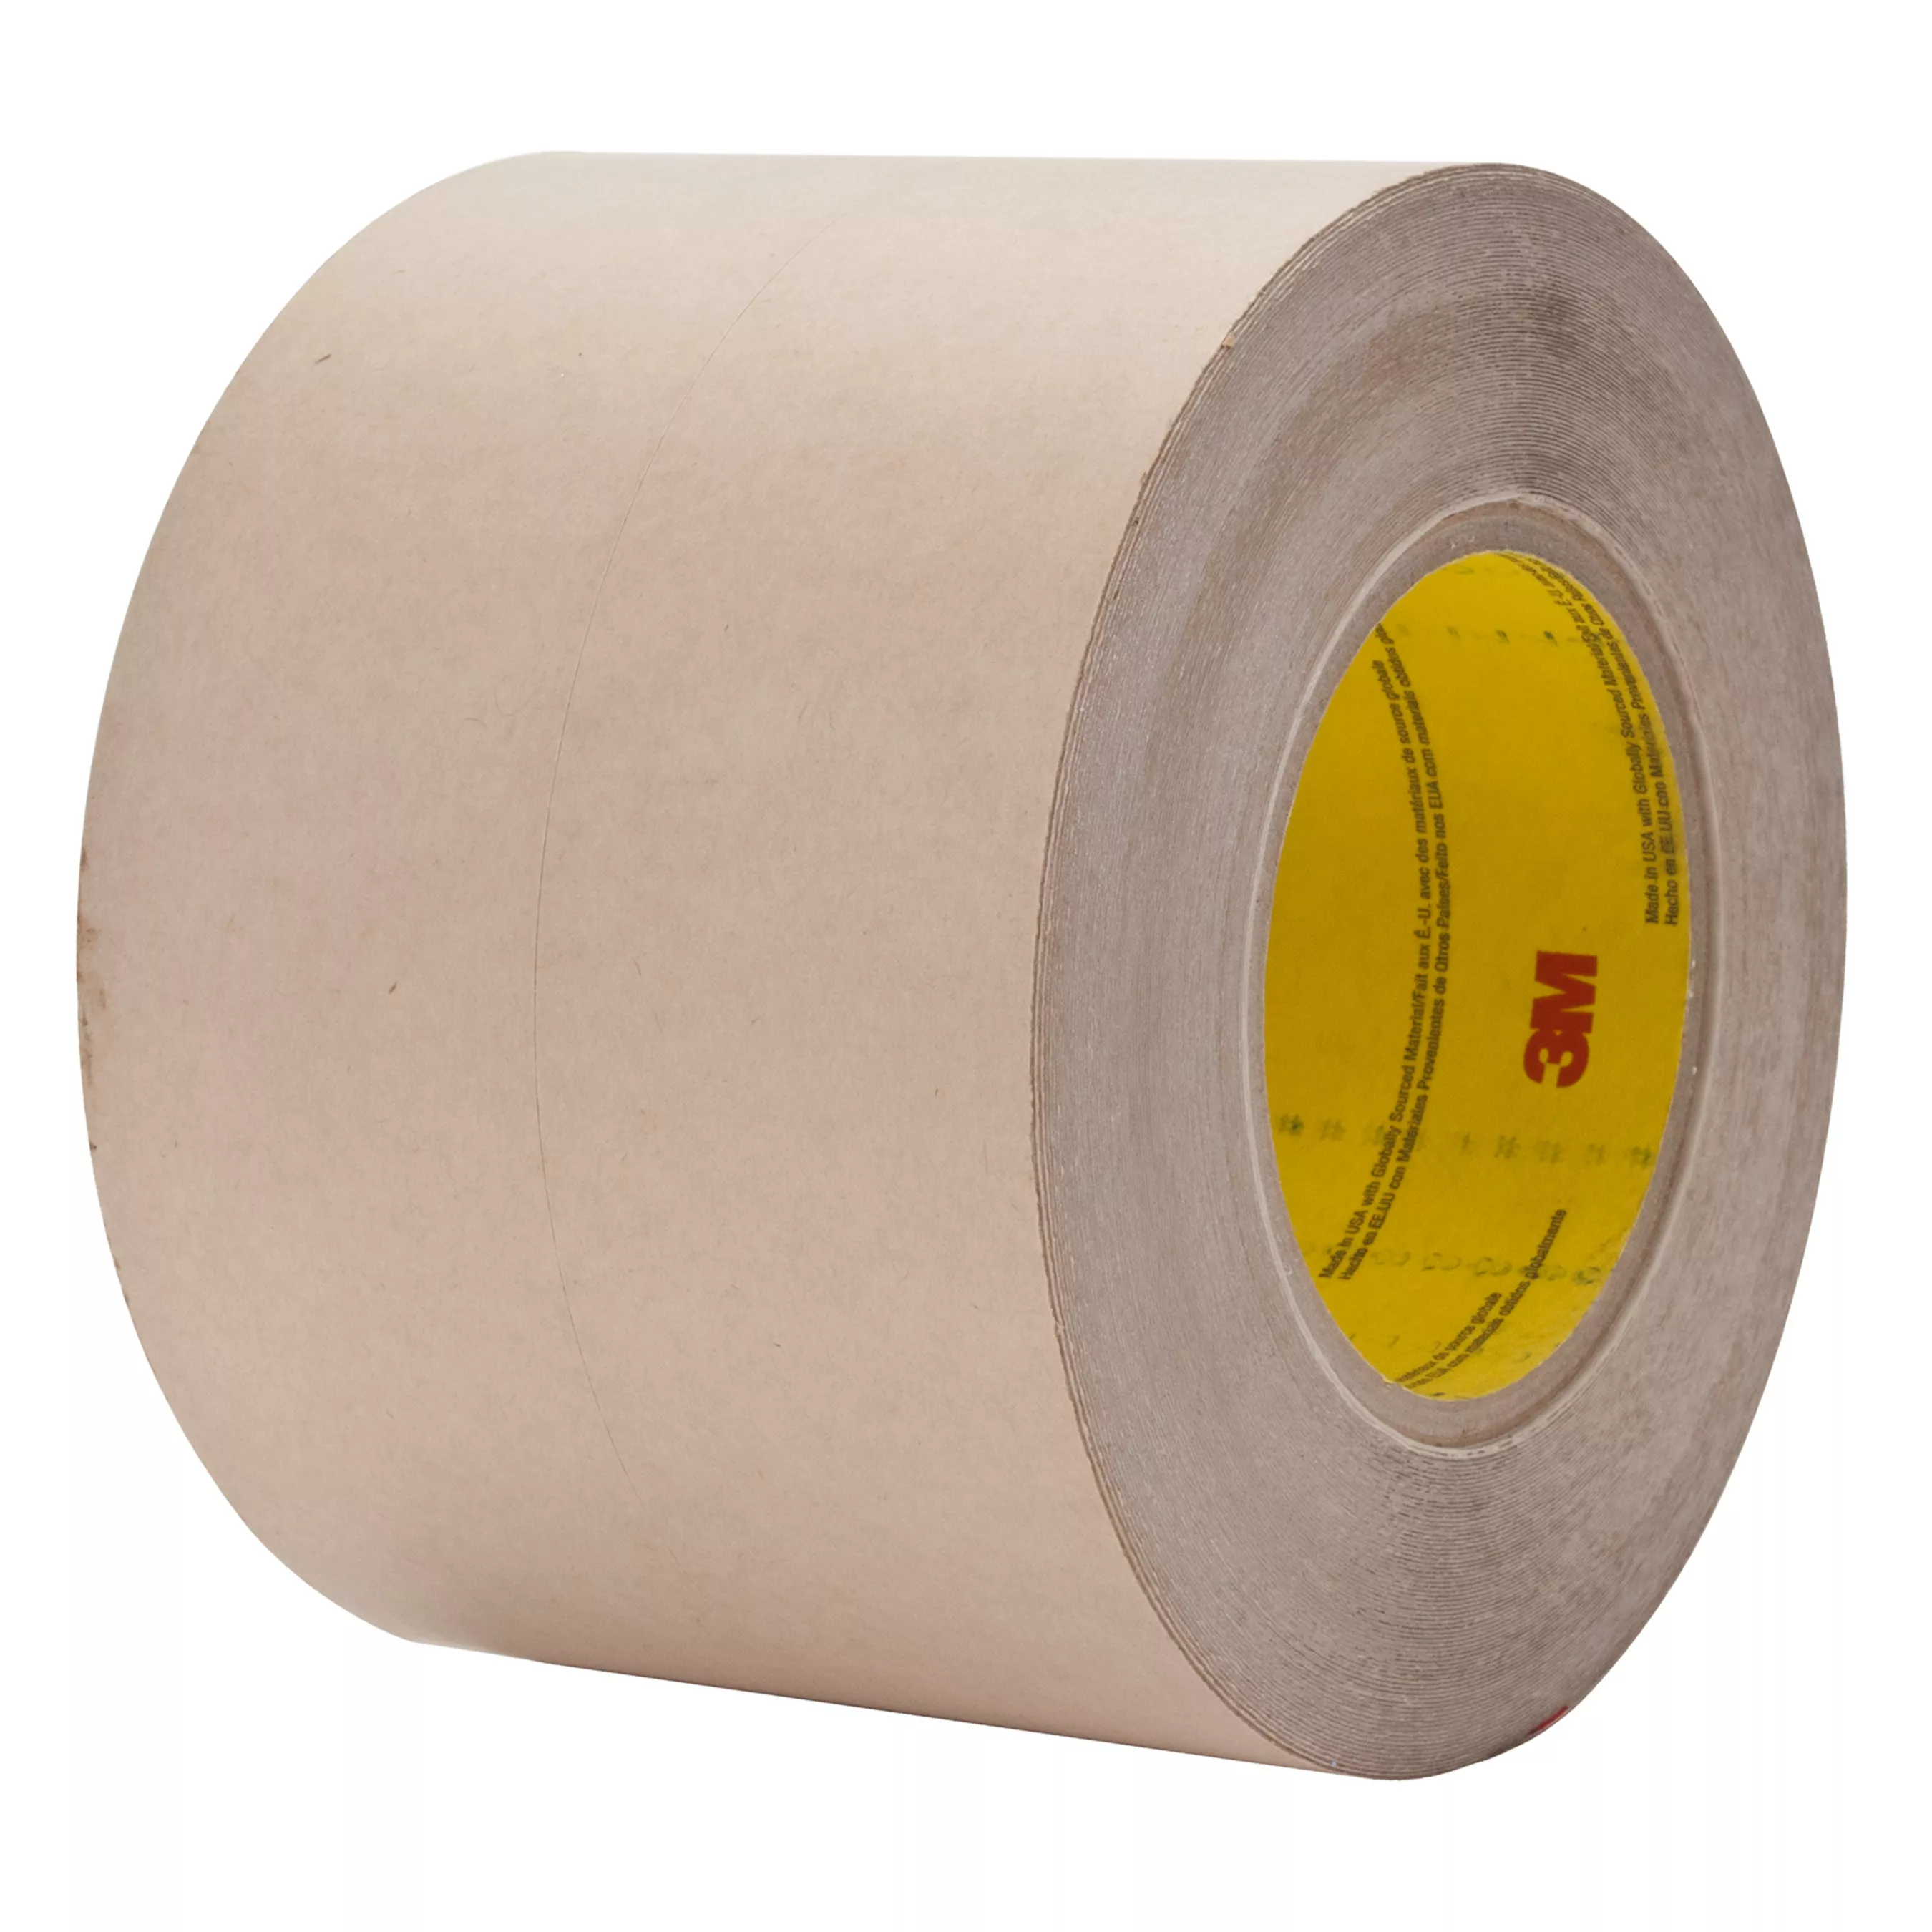 3M™ Sealing Tape 8777, Tan, 60 in x 75 ft, 1 Roll/Case, Solid Liner